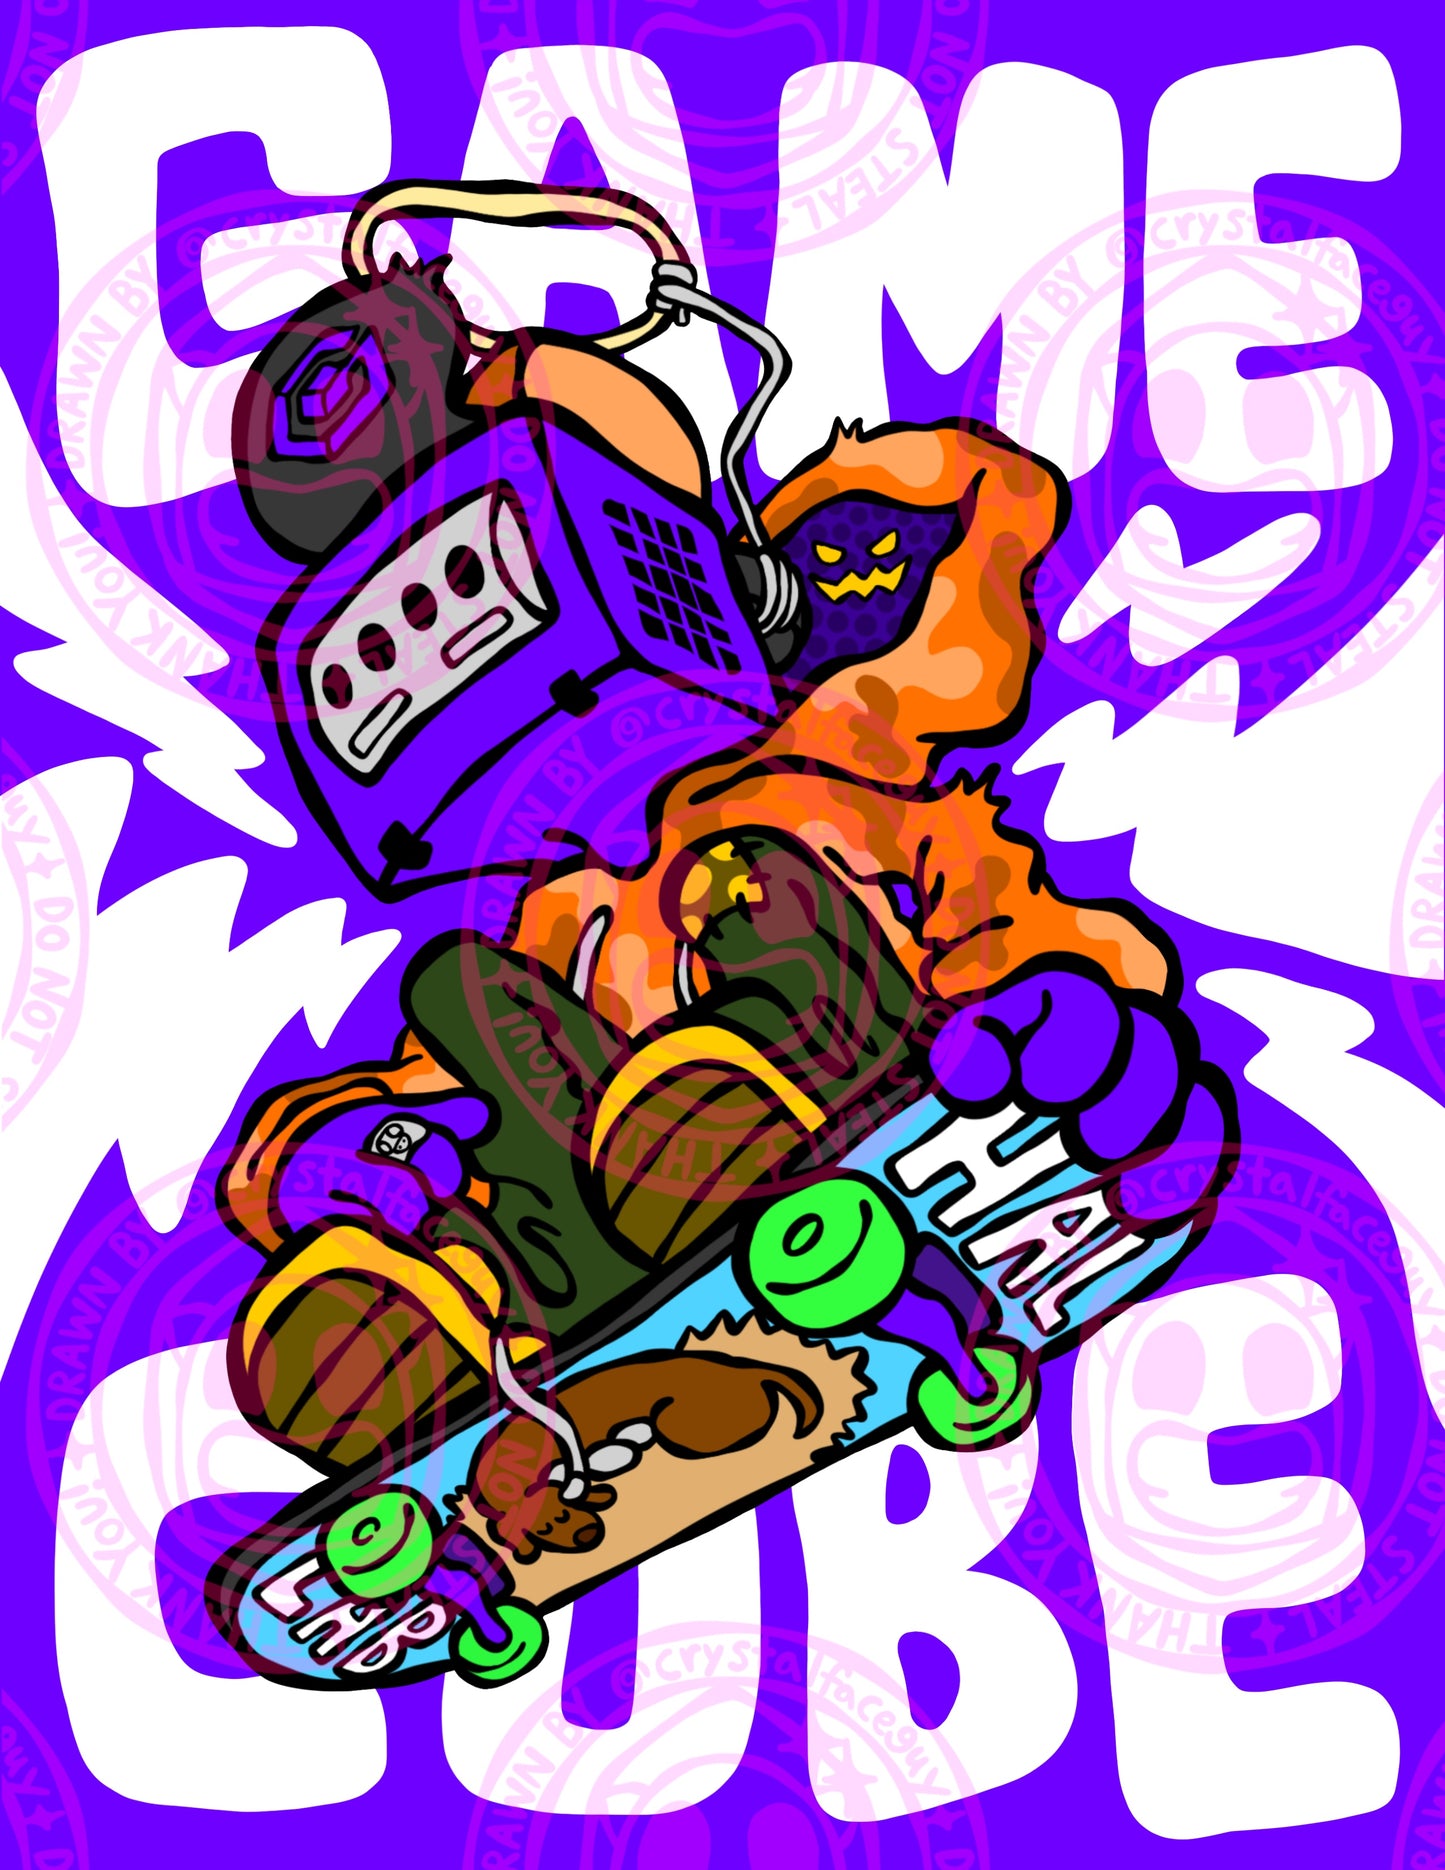 "Cubed Pro Skater" By CrystalFace